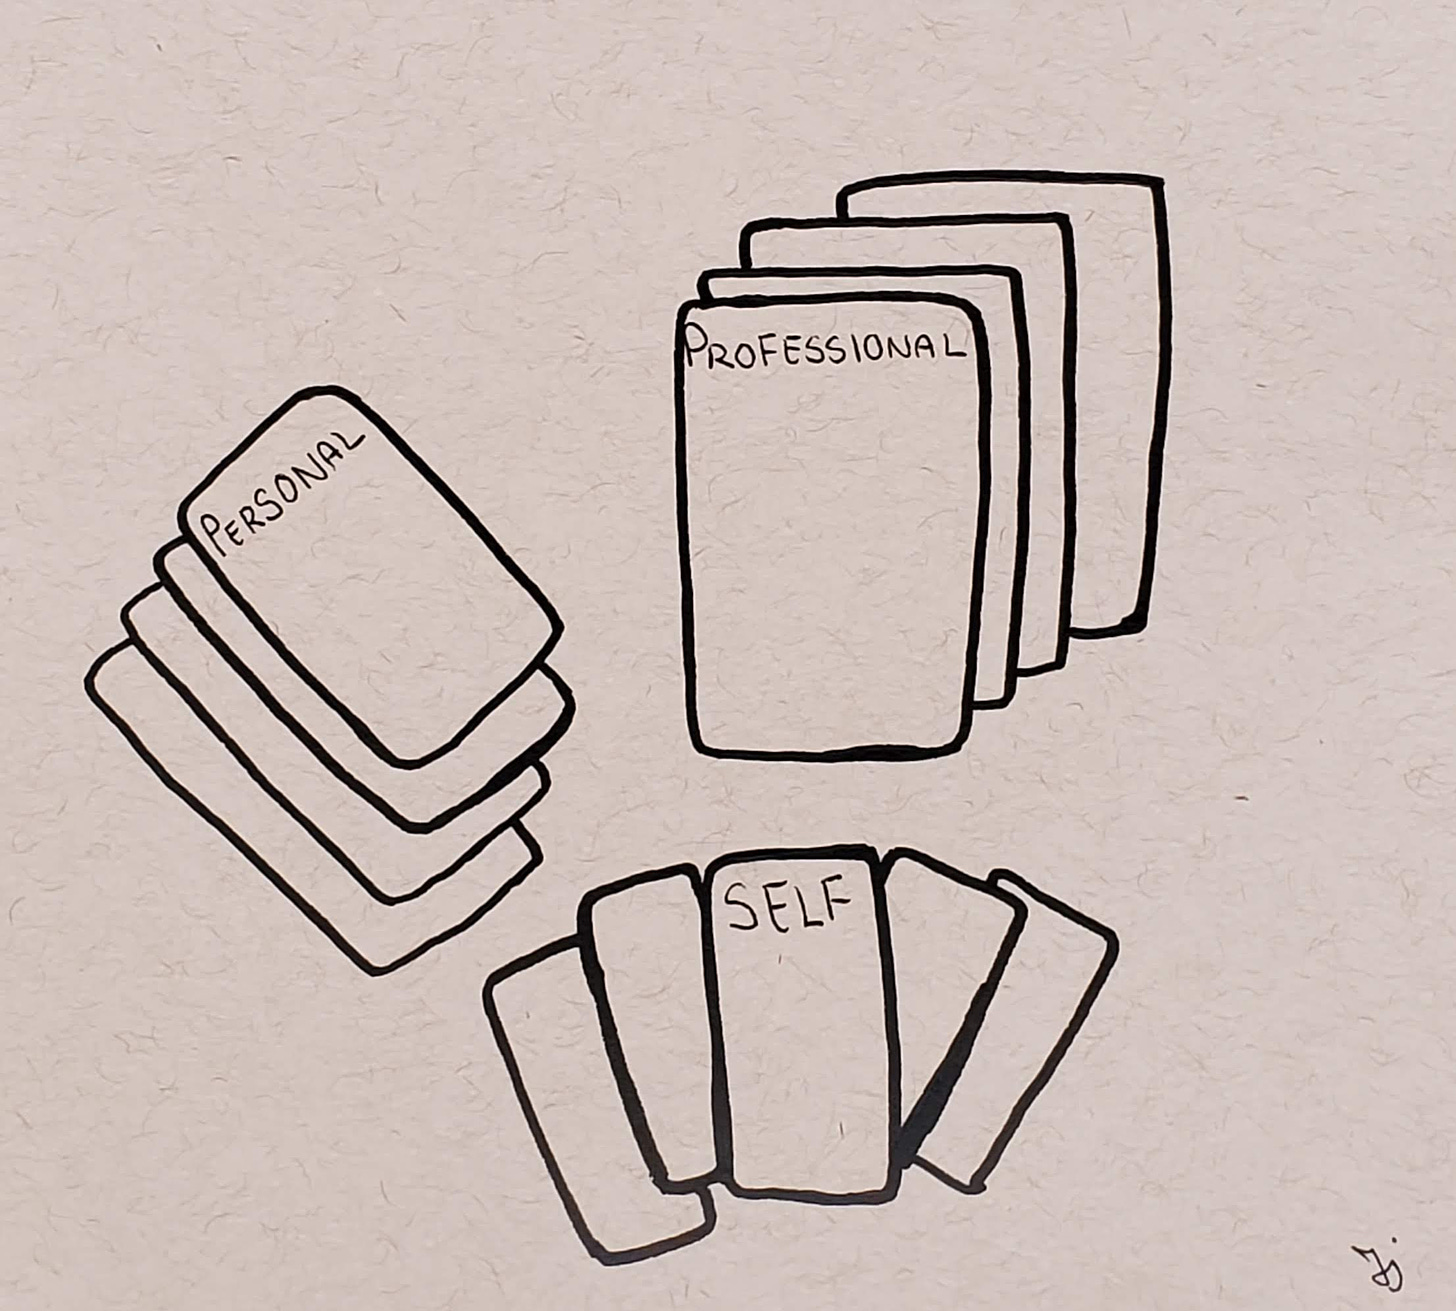 Sketch of three decks of cards each with a title: "Personal," "Self," "Professional"